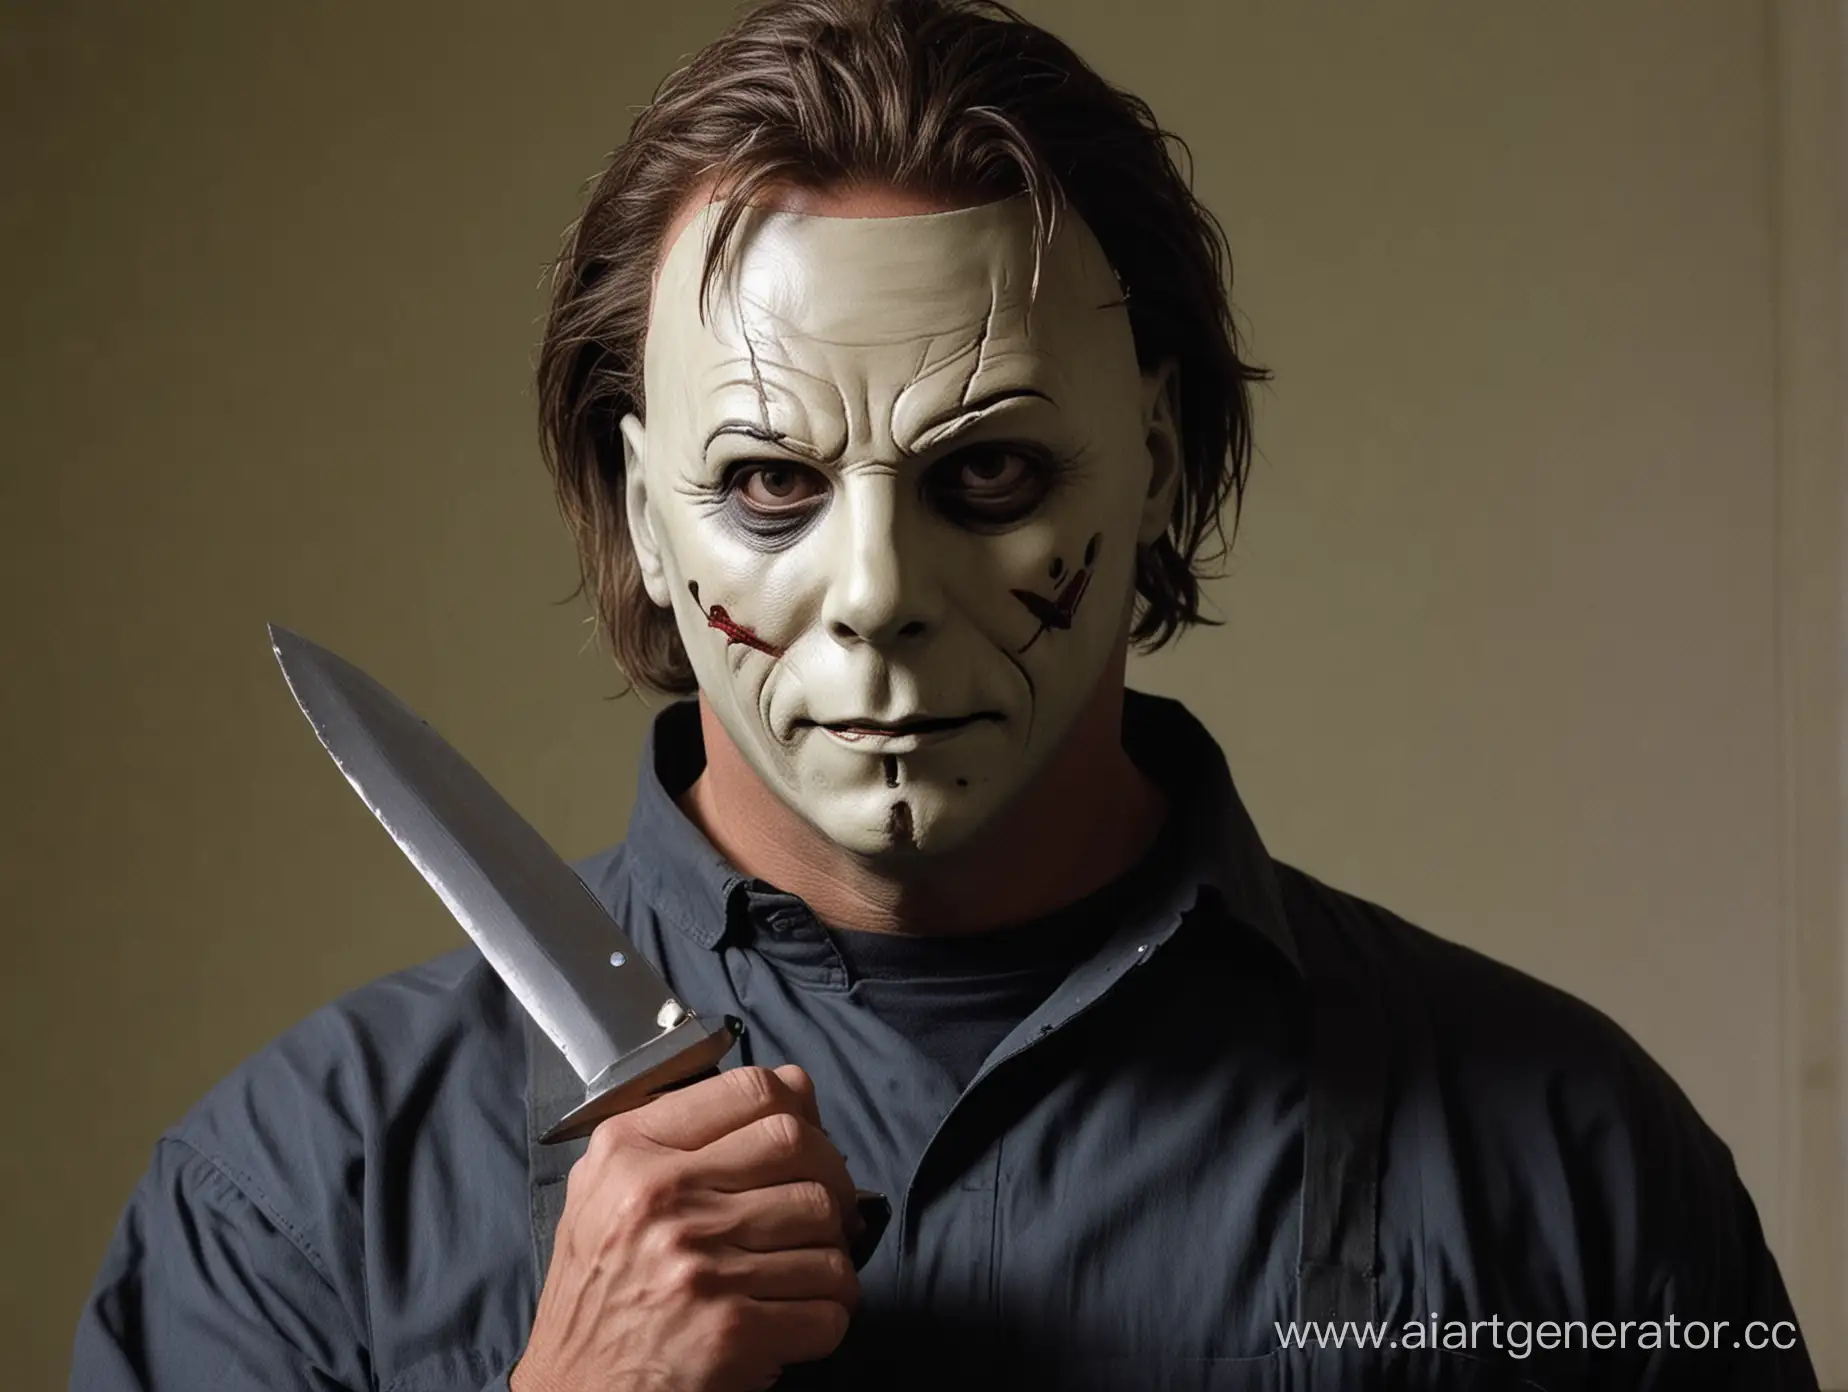 Masked-Michael-Myers-Holding-a-Knife-in-a-Suspenseful-Portrait